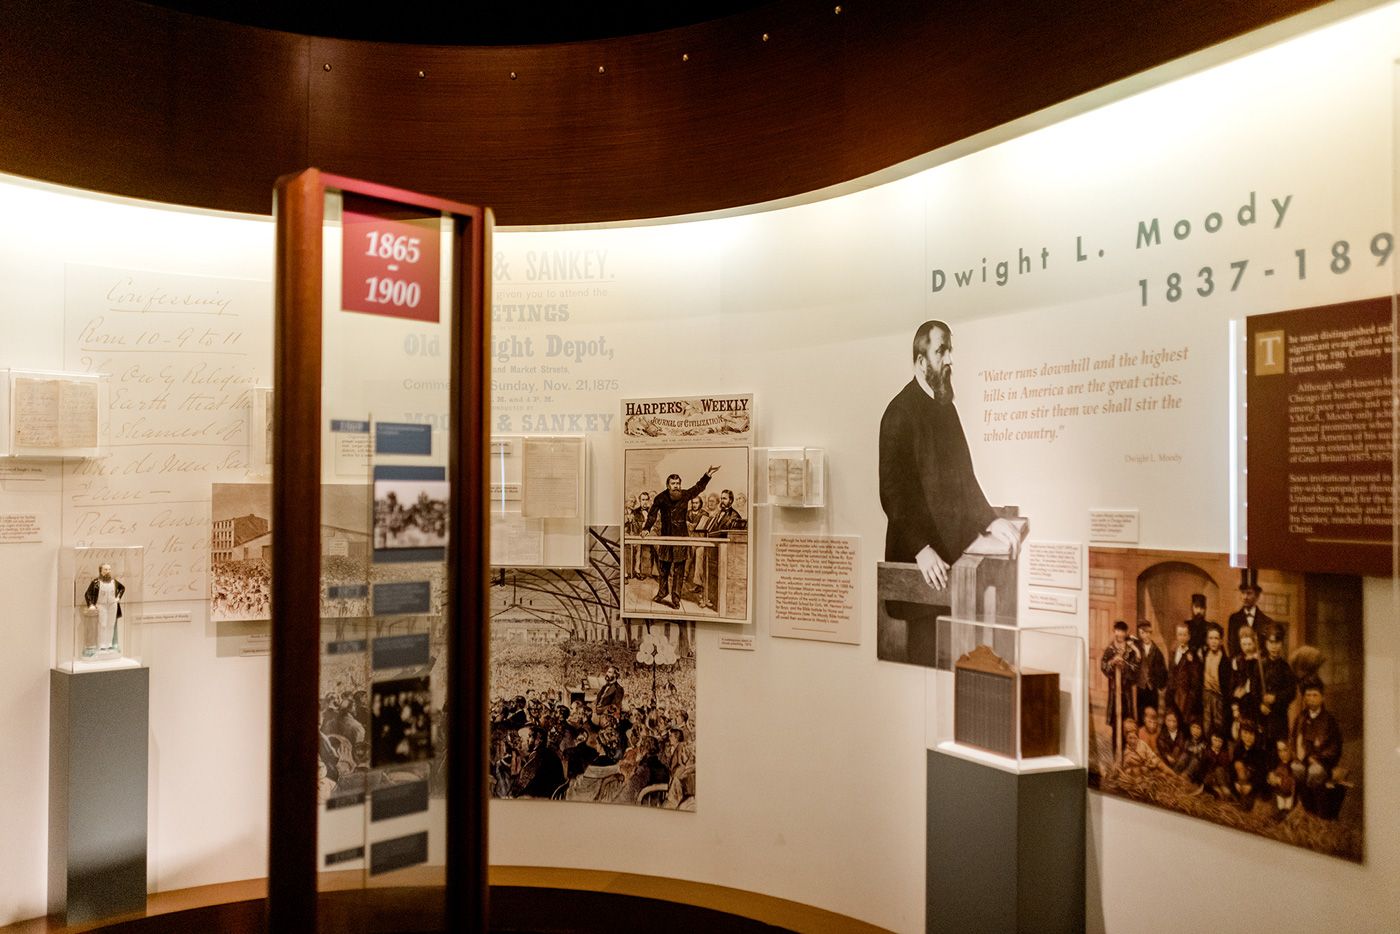 Artifacts in the Billy Graham Museum exhibit on the History of Evangelicalism in America